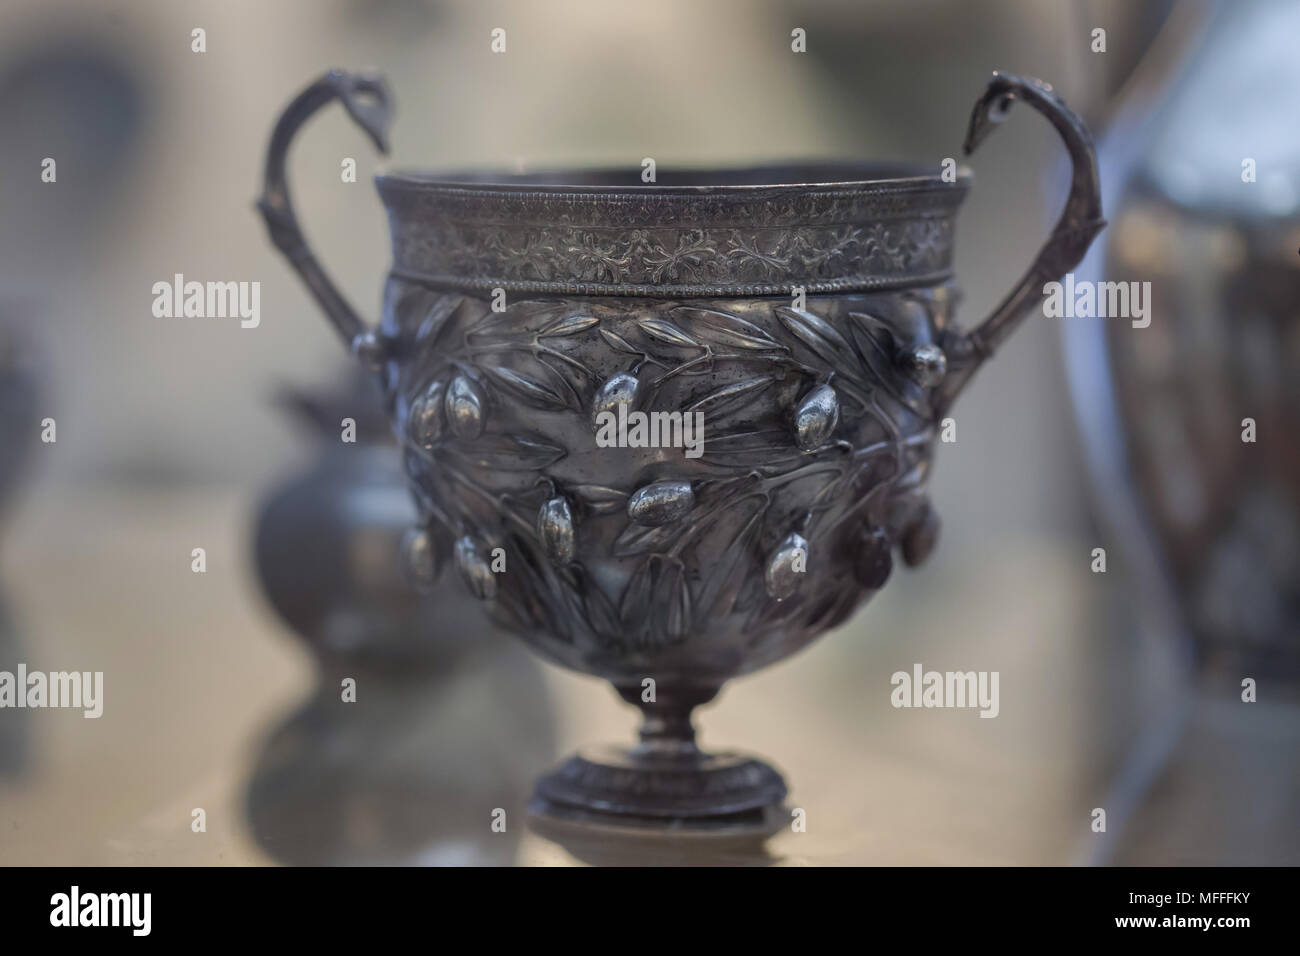 Olive branches depicted in the Roman silver goblet found in the Casa del Menandro (House of Menander) in Pompeii on display in the National Archaeological Museum (Museo Archeologico Nazionale di Napoli) in Naples, Campania, Italy. Stock Photo